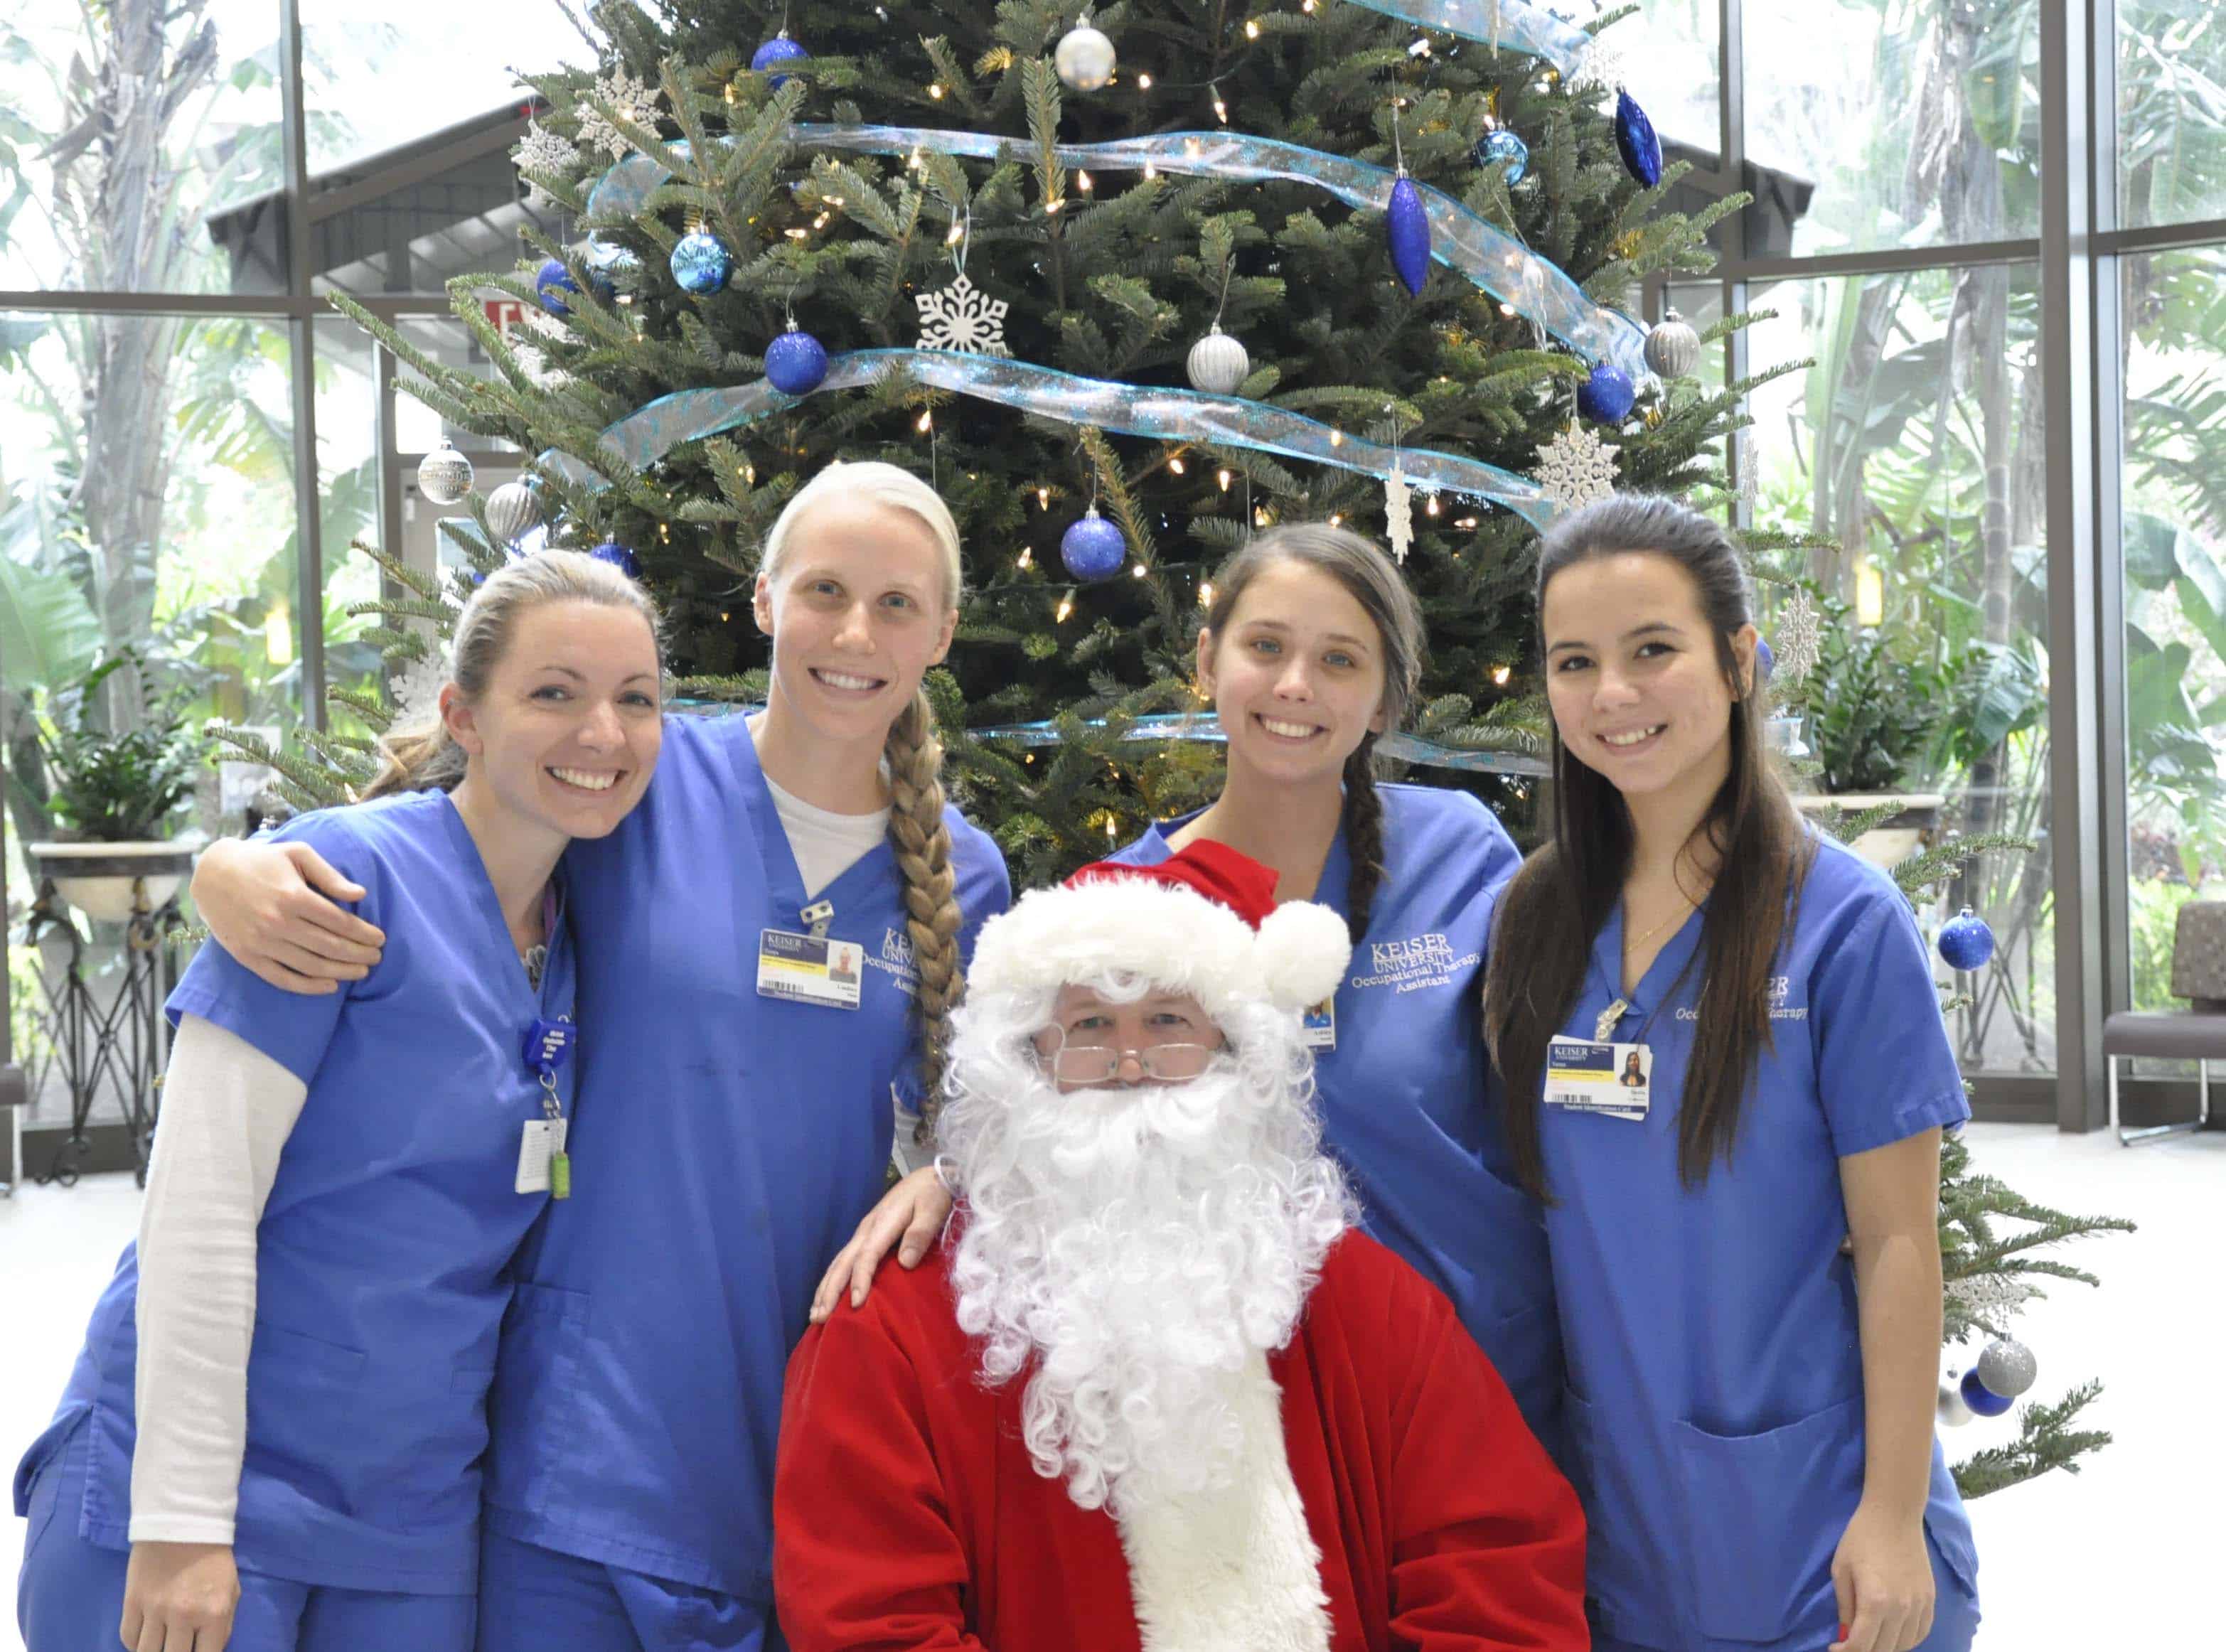 The Tampa Campus Celebrates for the Holidays